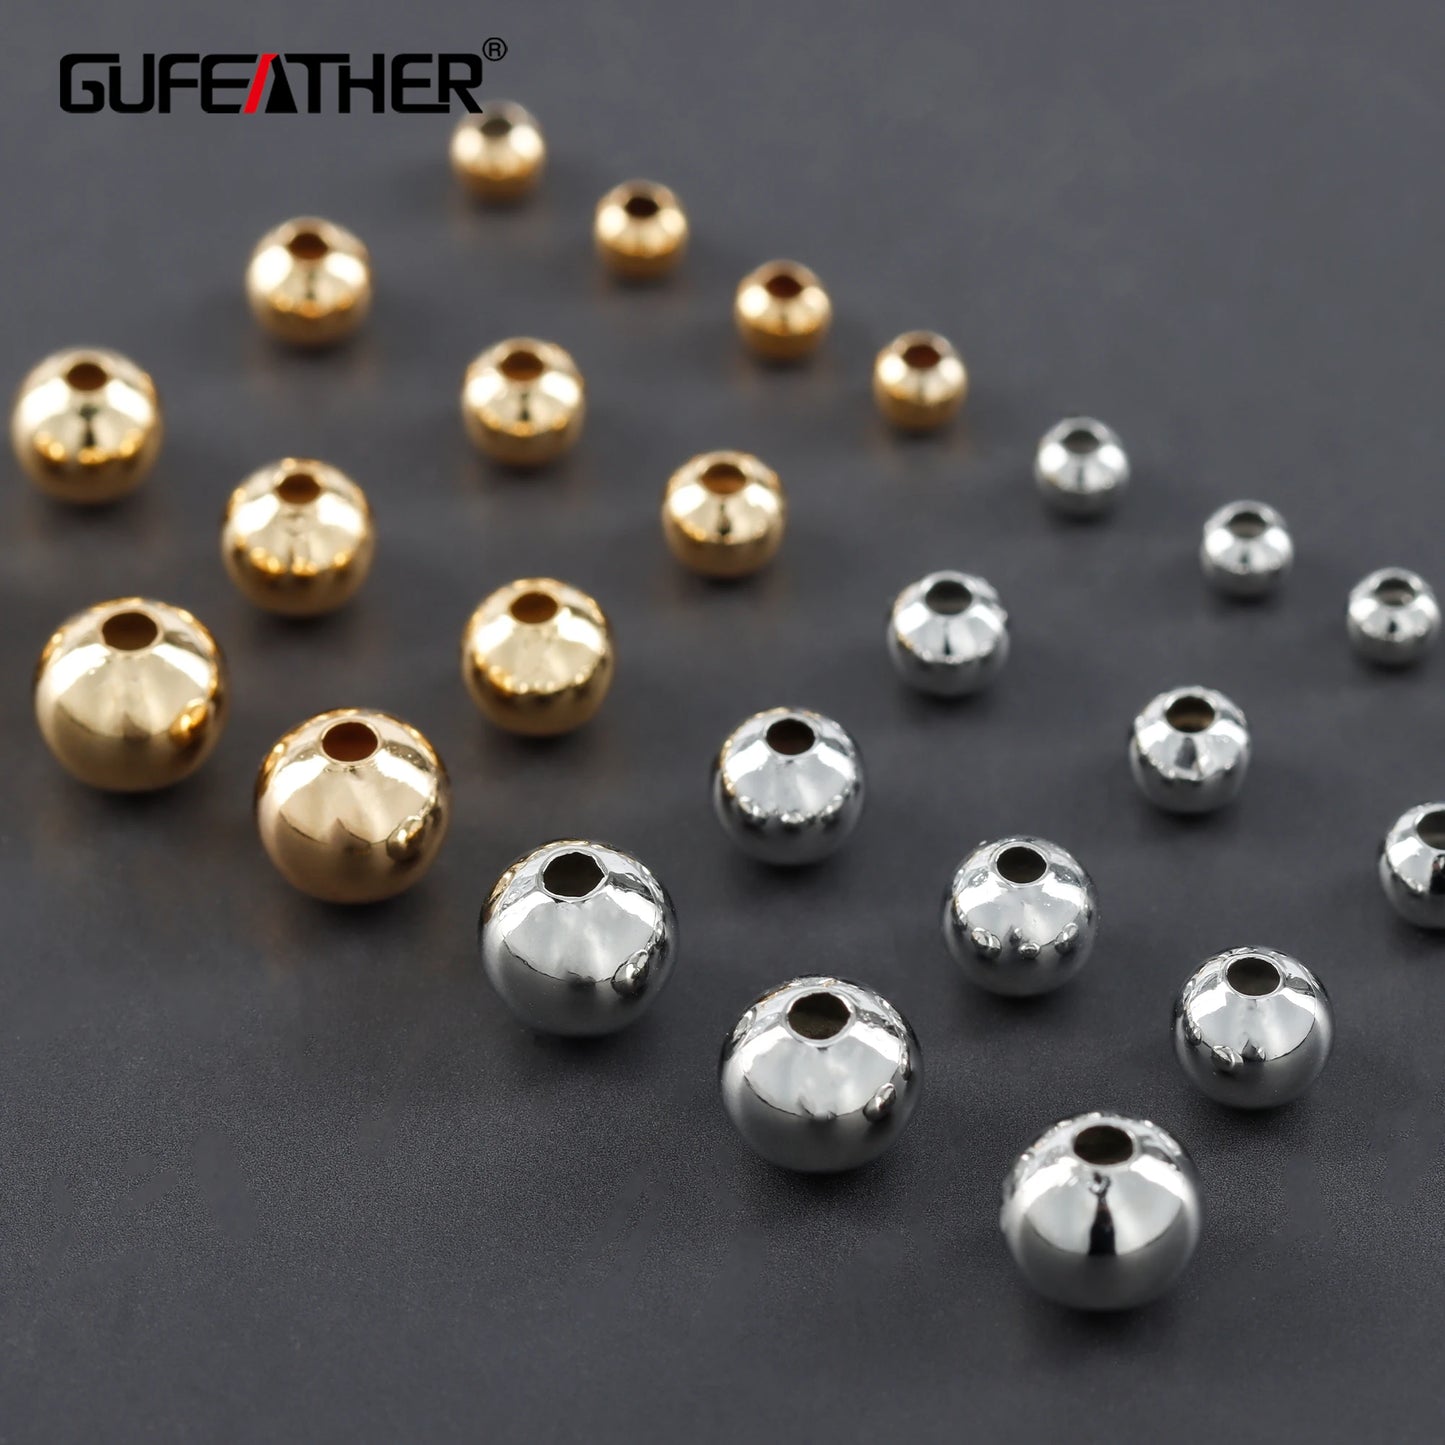 GUFEATHER M911,jewelry accessories,pass REACH,nickel free,18k gold rhodium plated,copper,diy beads accessories,jewelry making